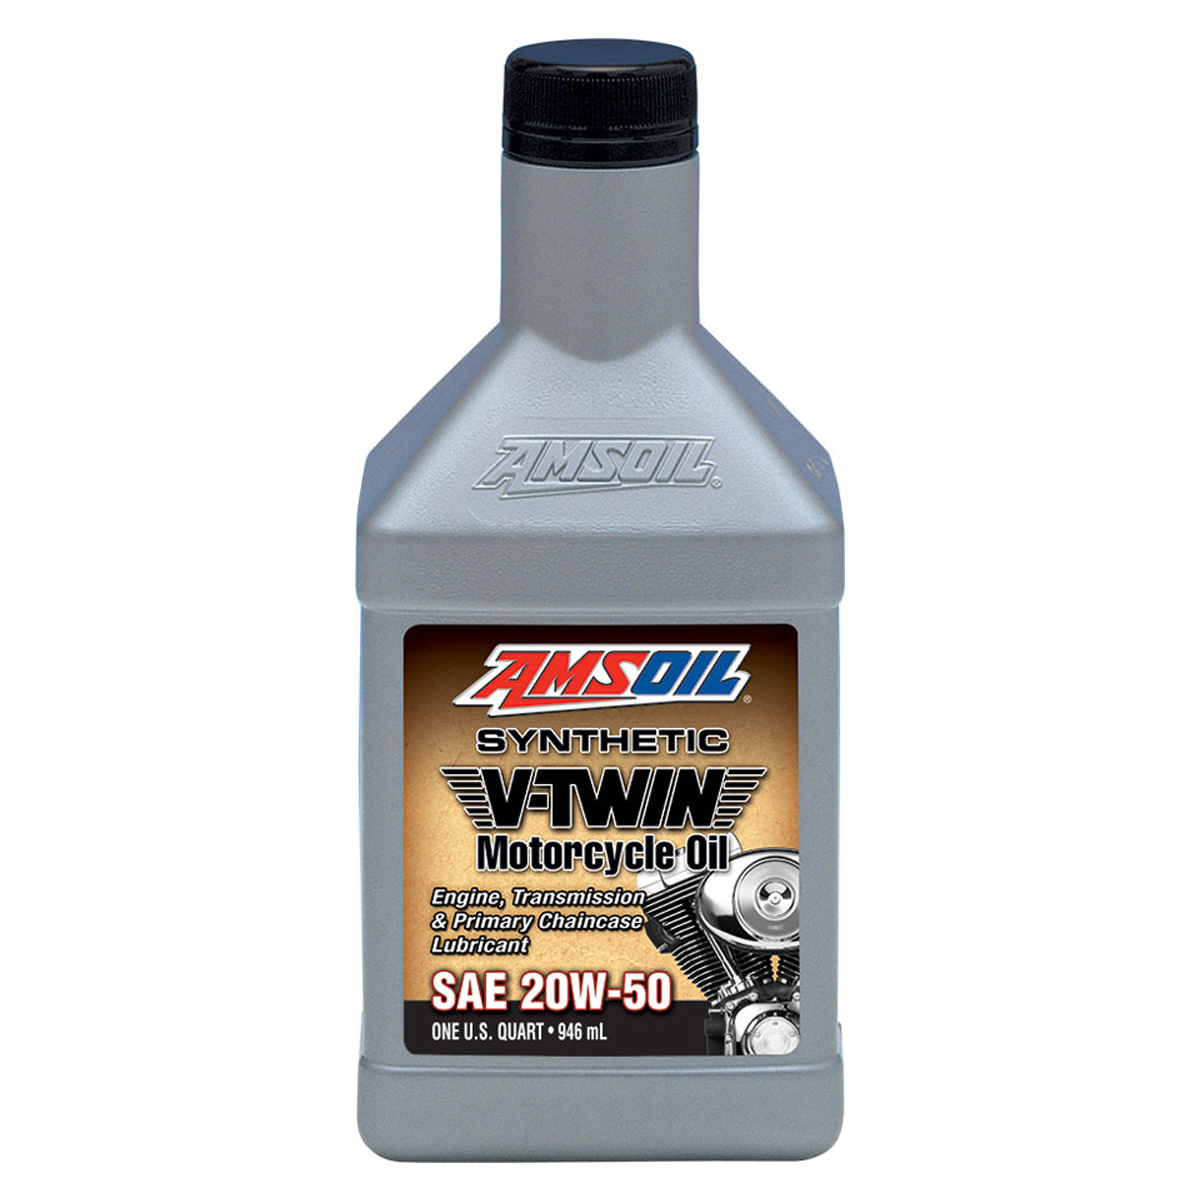 AMSOIL 20w-50 Motorcycle Engine Oil one quart